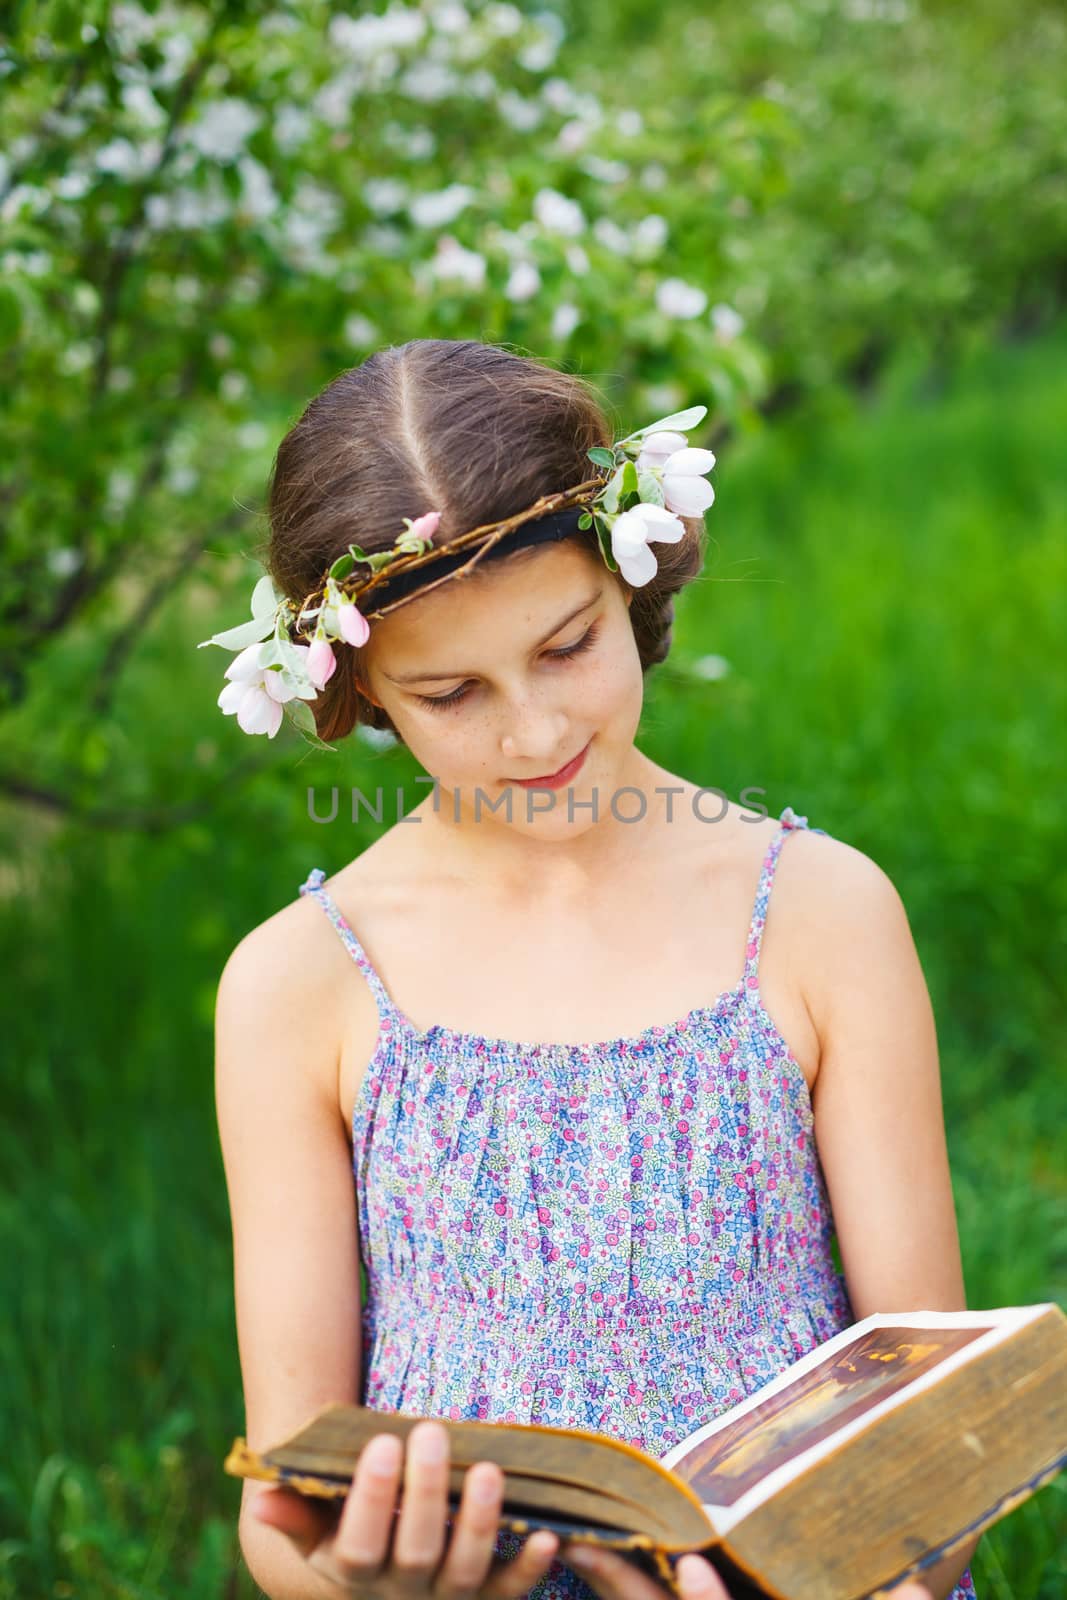 Adorable girl in blooming apple tree garden on spring day